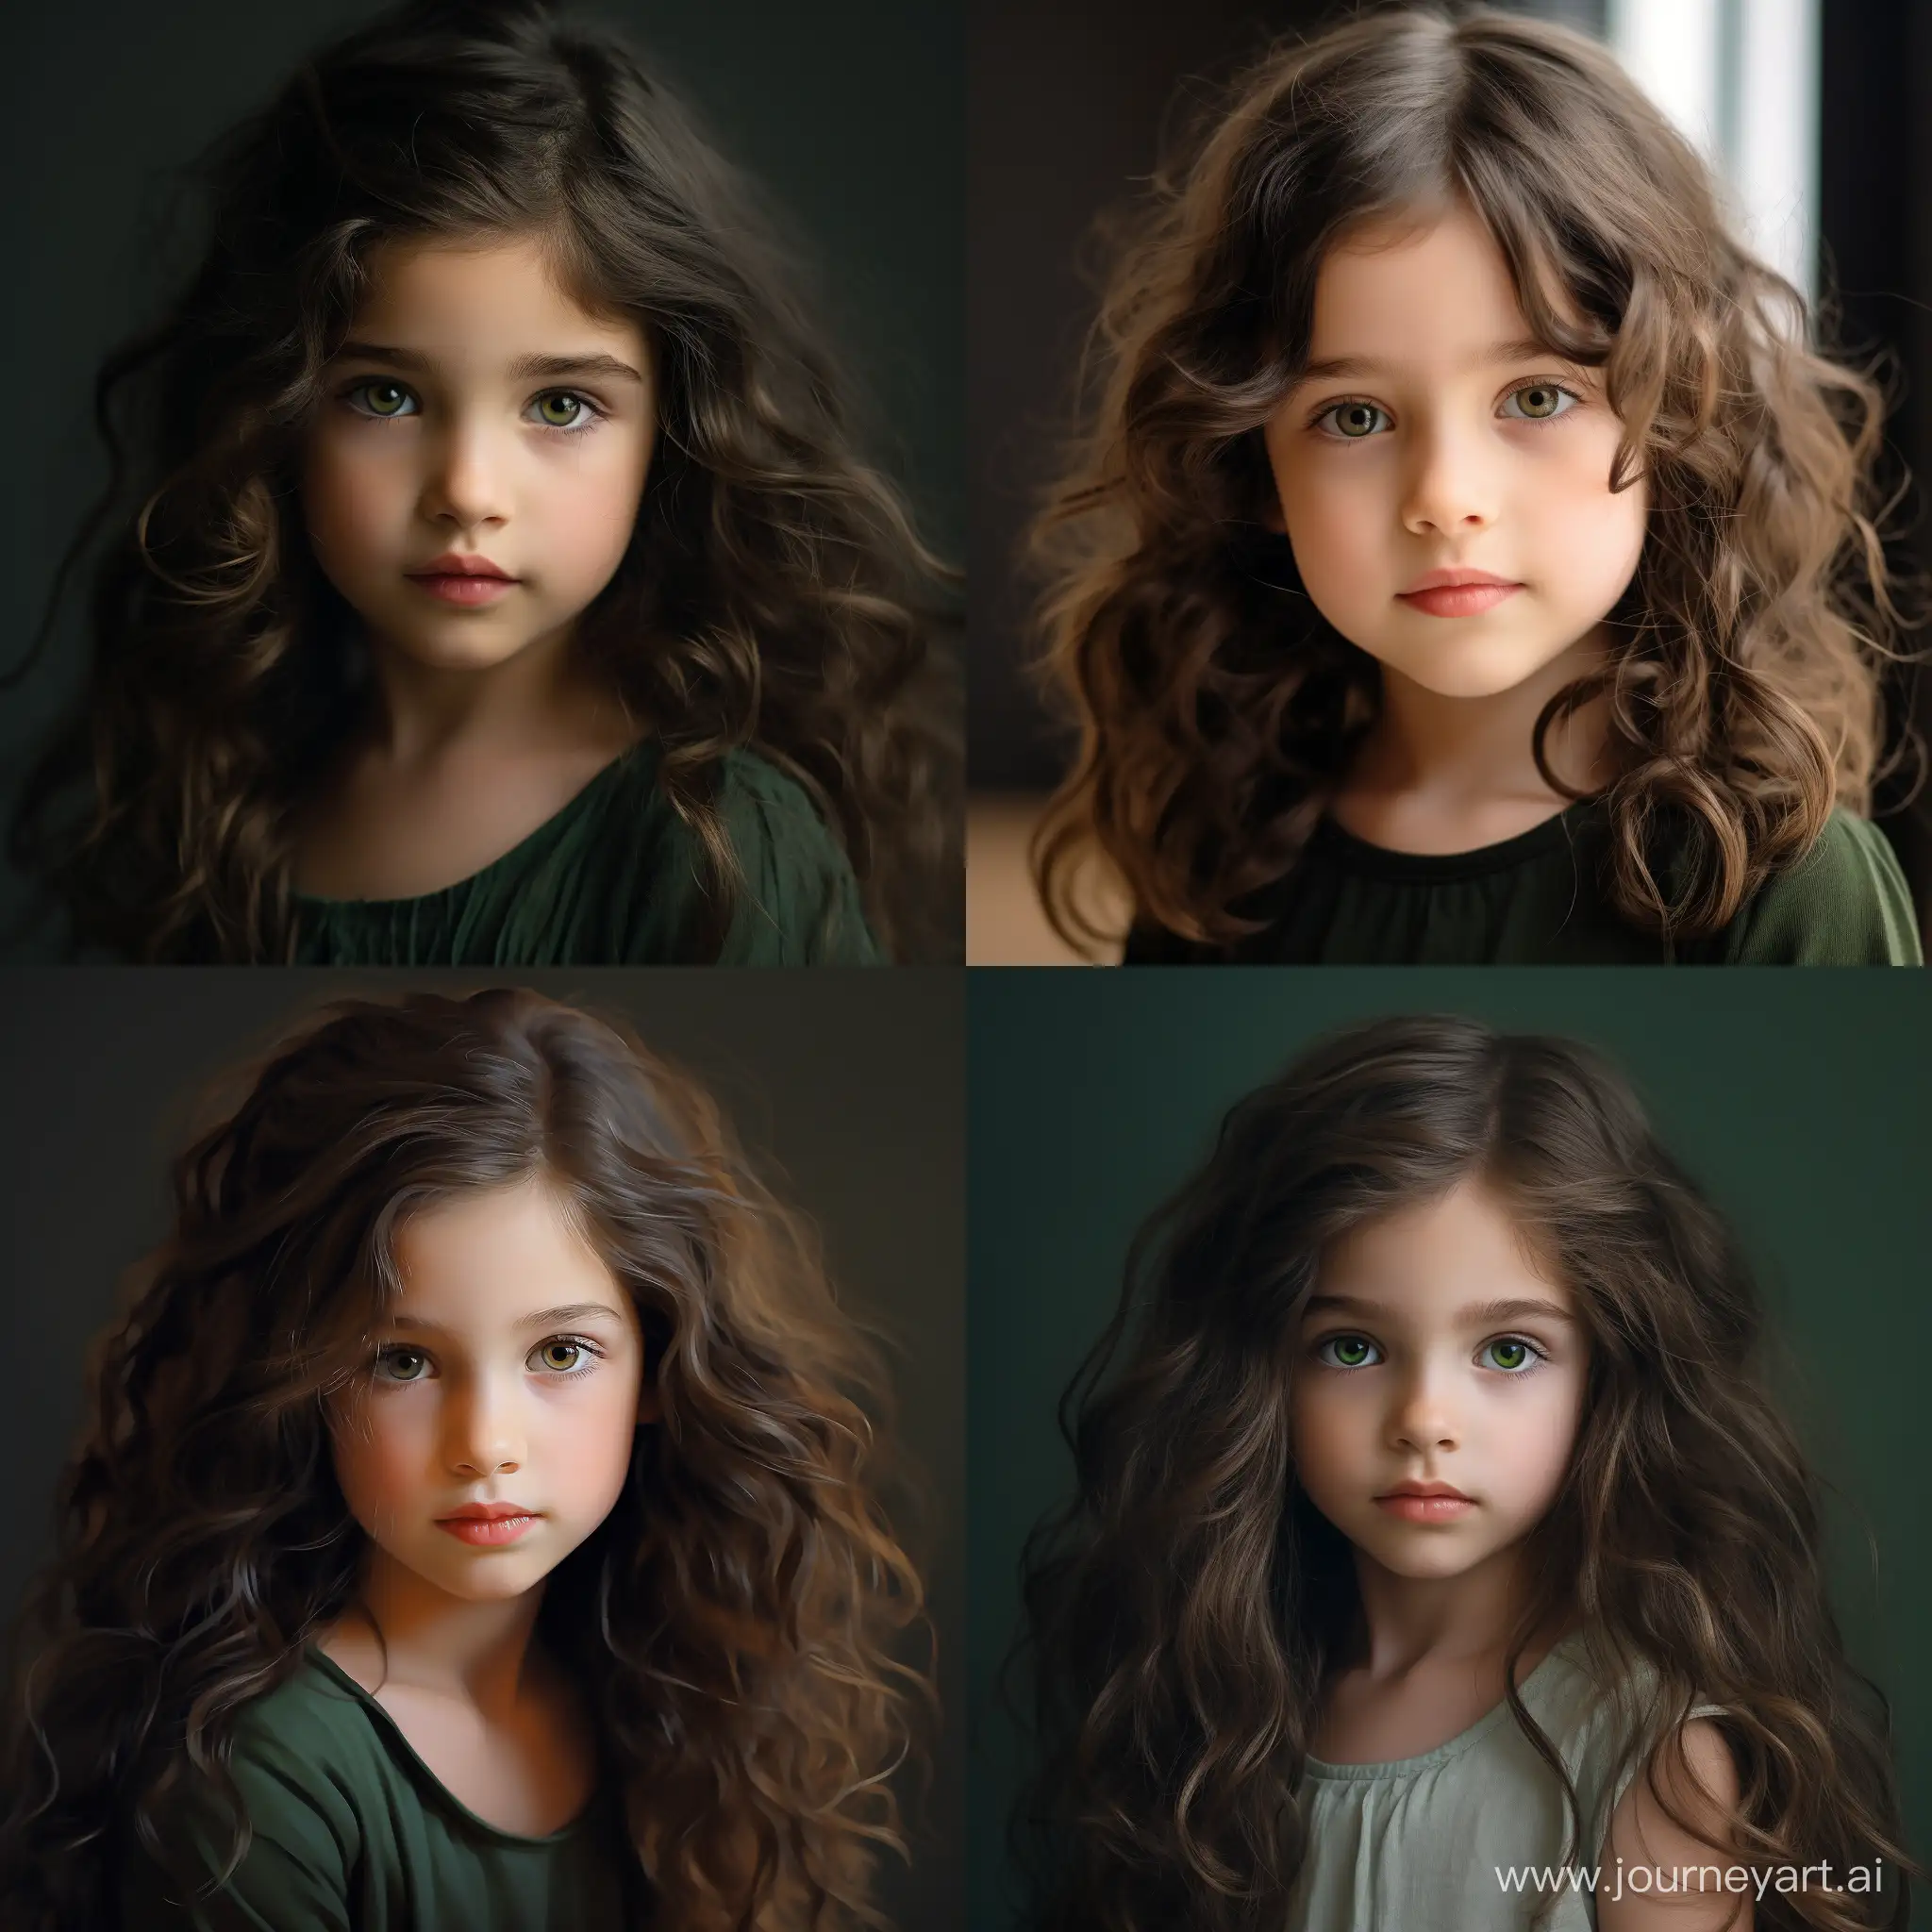 Adorable-5YearOld-Girl-with-Dark-Hair-and-Green-Eyes